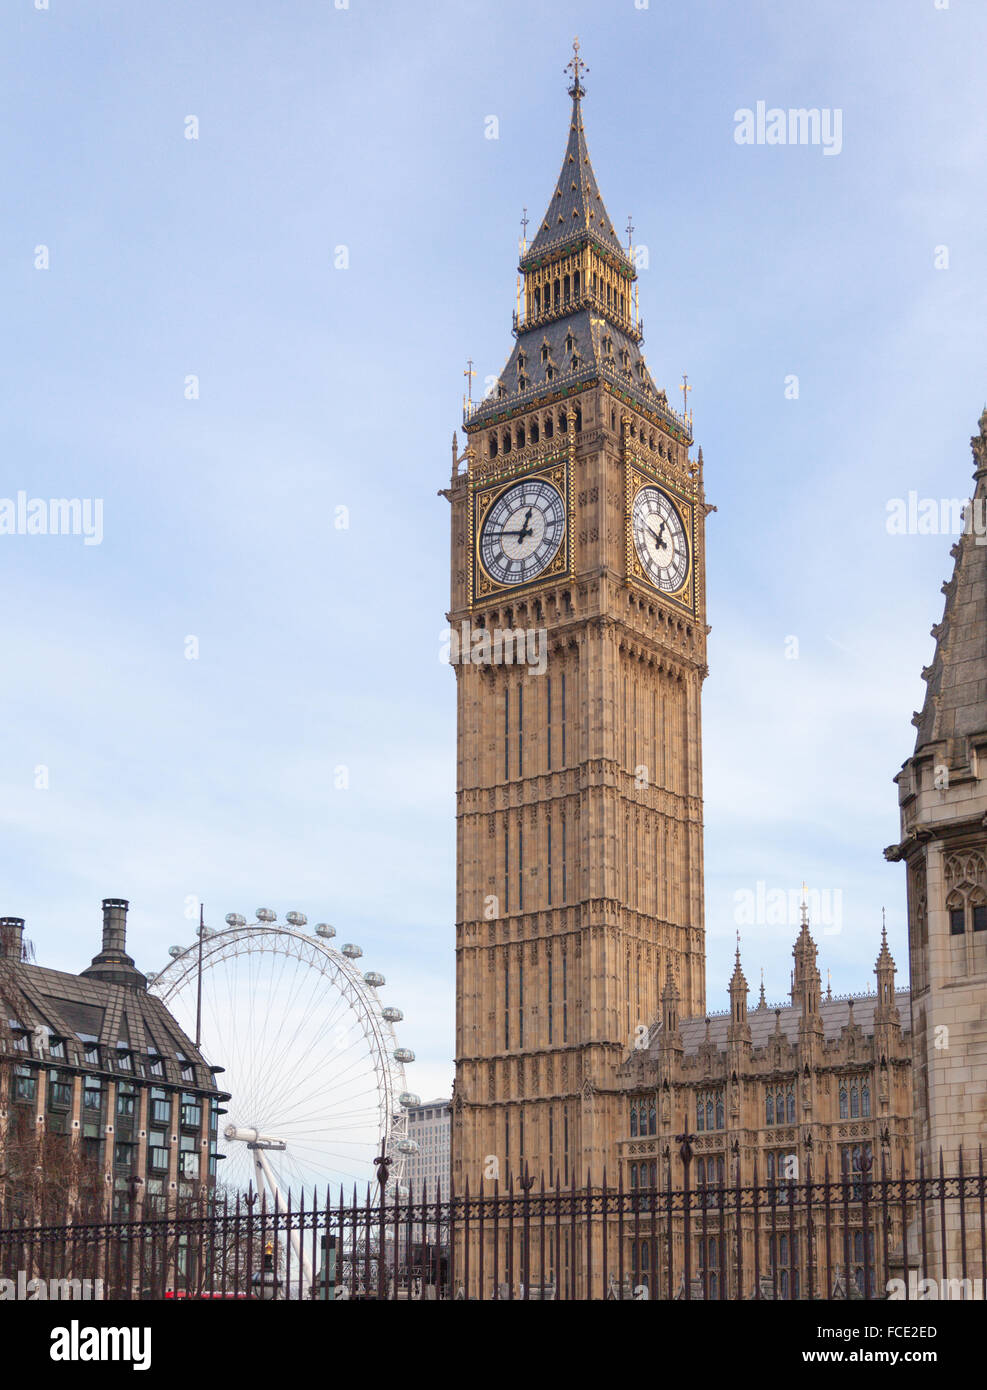 Big Ben London Eye High Resolution Stock Photography And Images Alamy